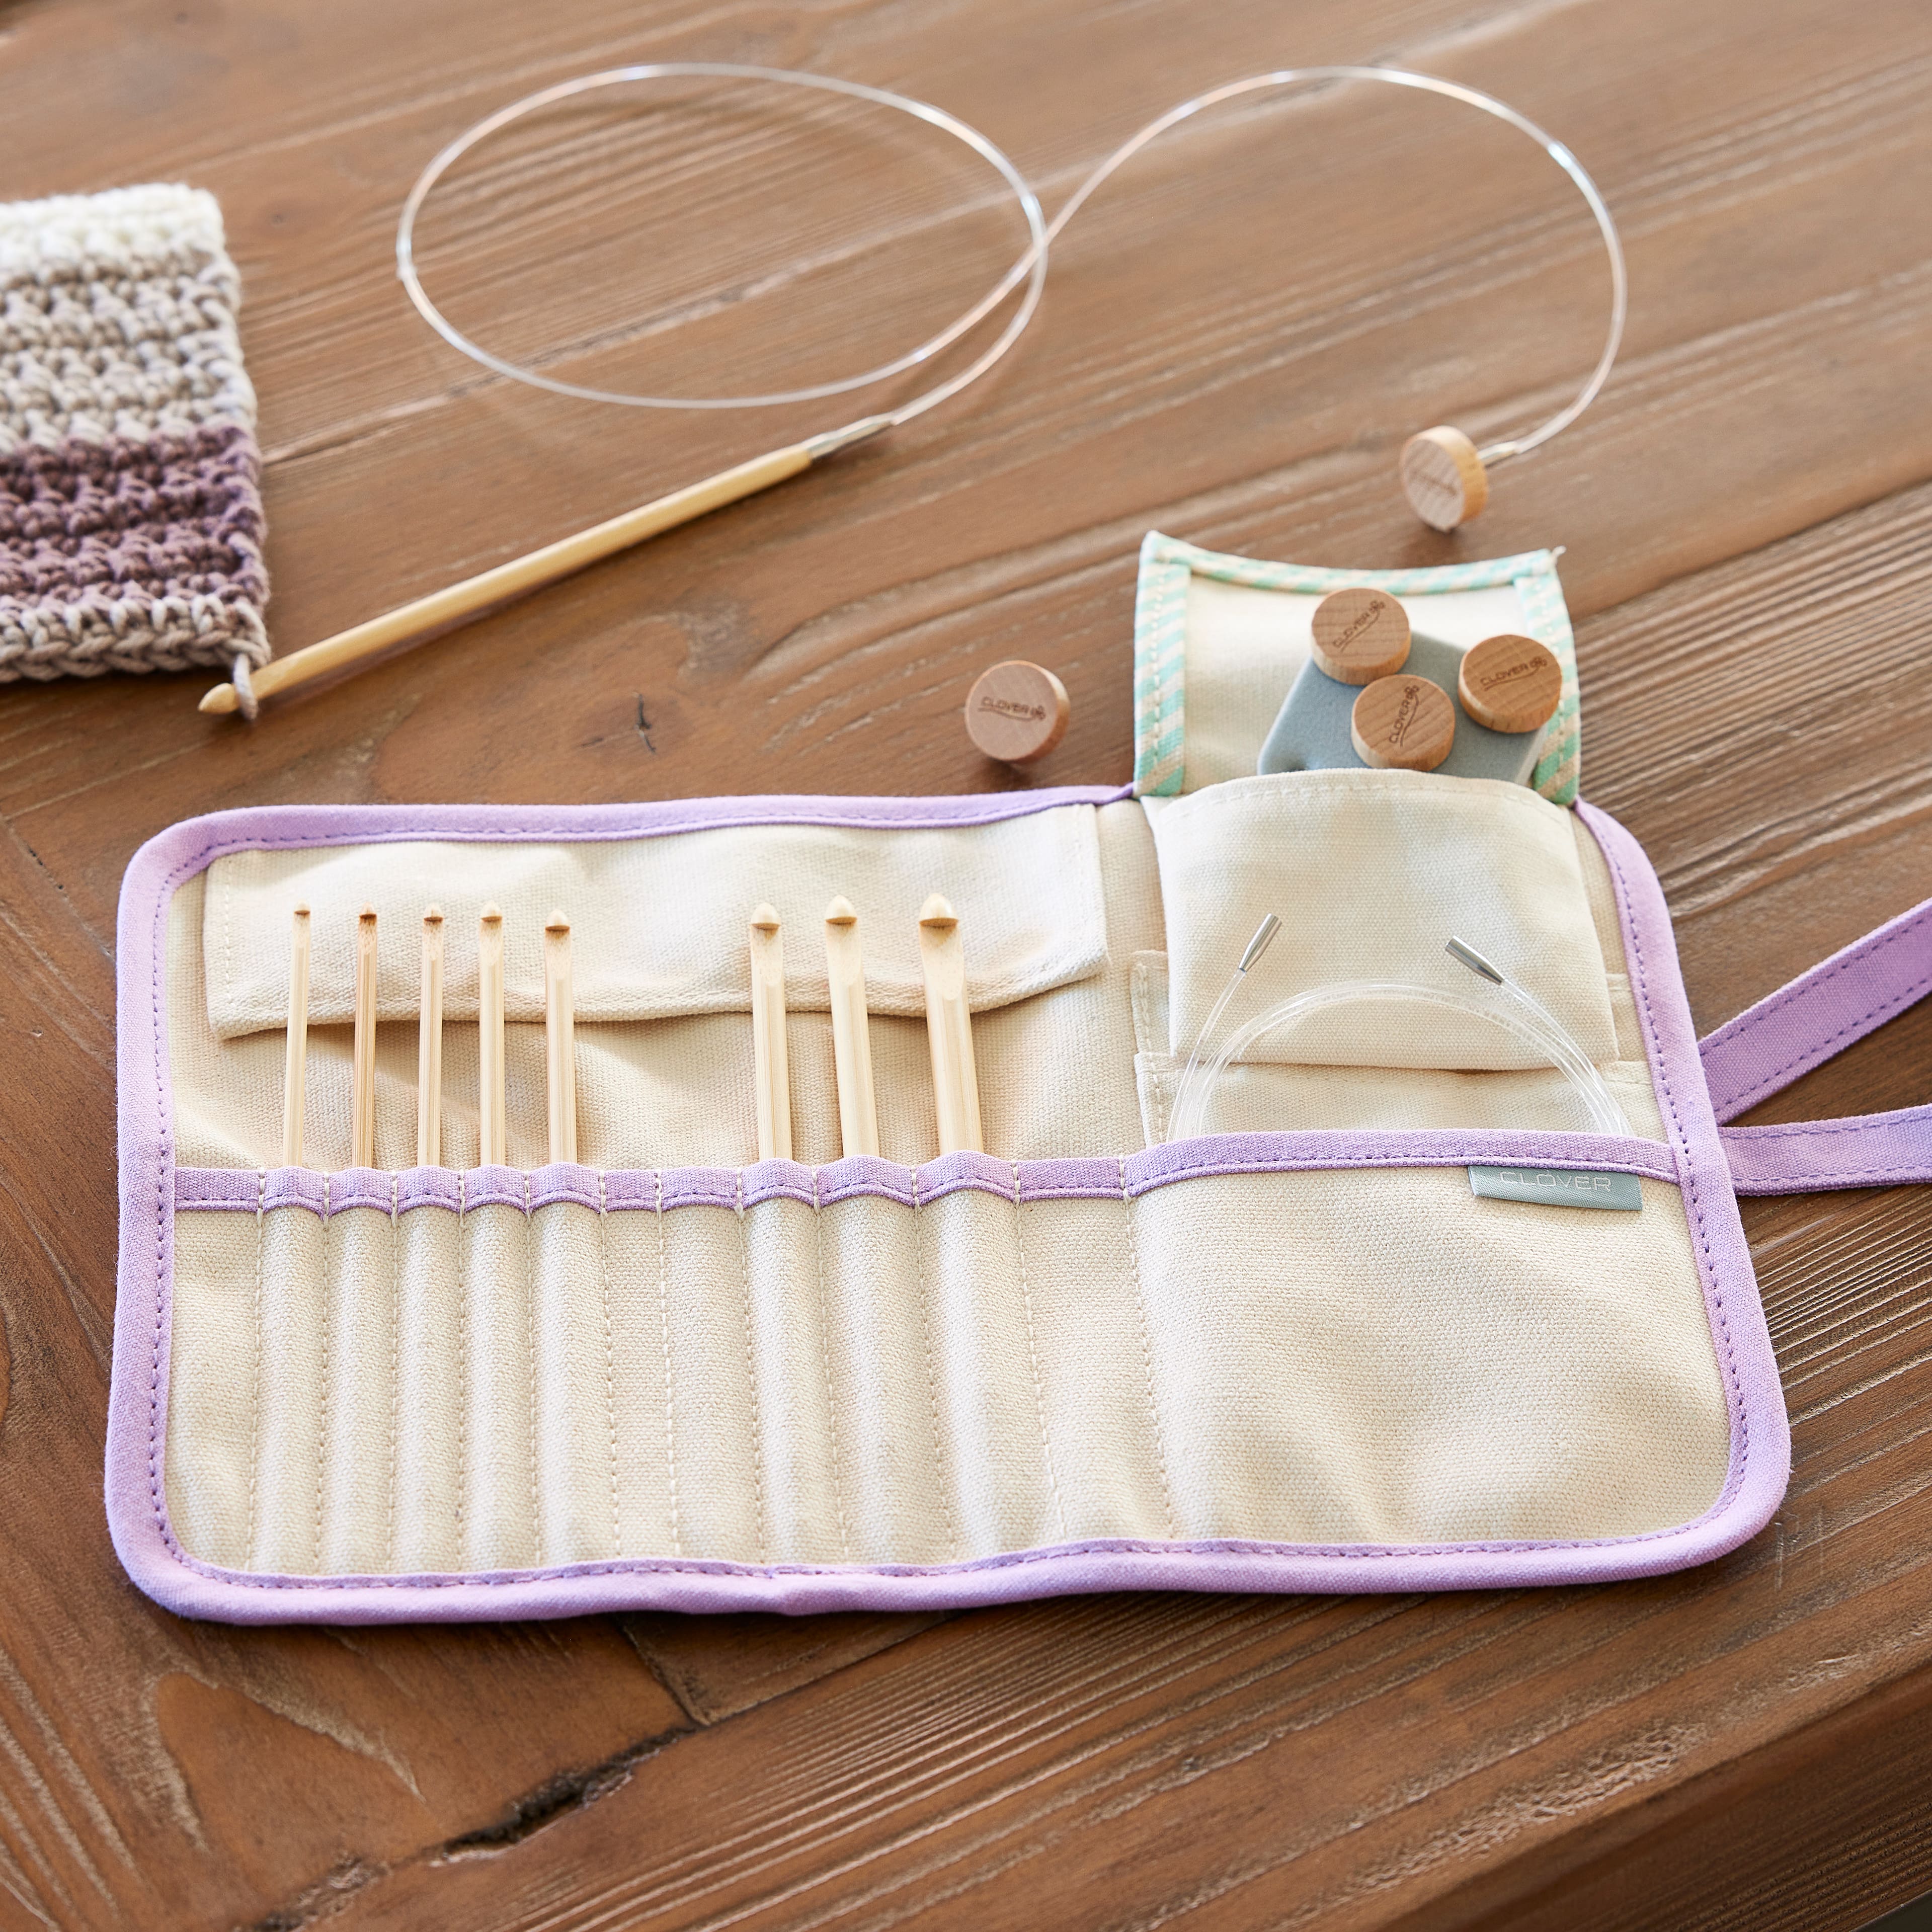 Why you need the Clover Interchangeable Tunisian Crochet Hook Set in 2023